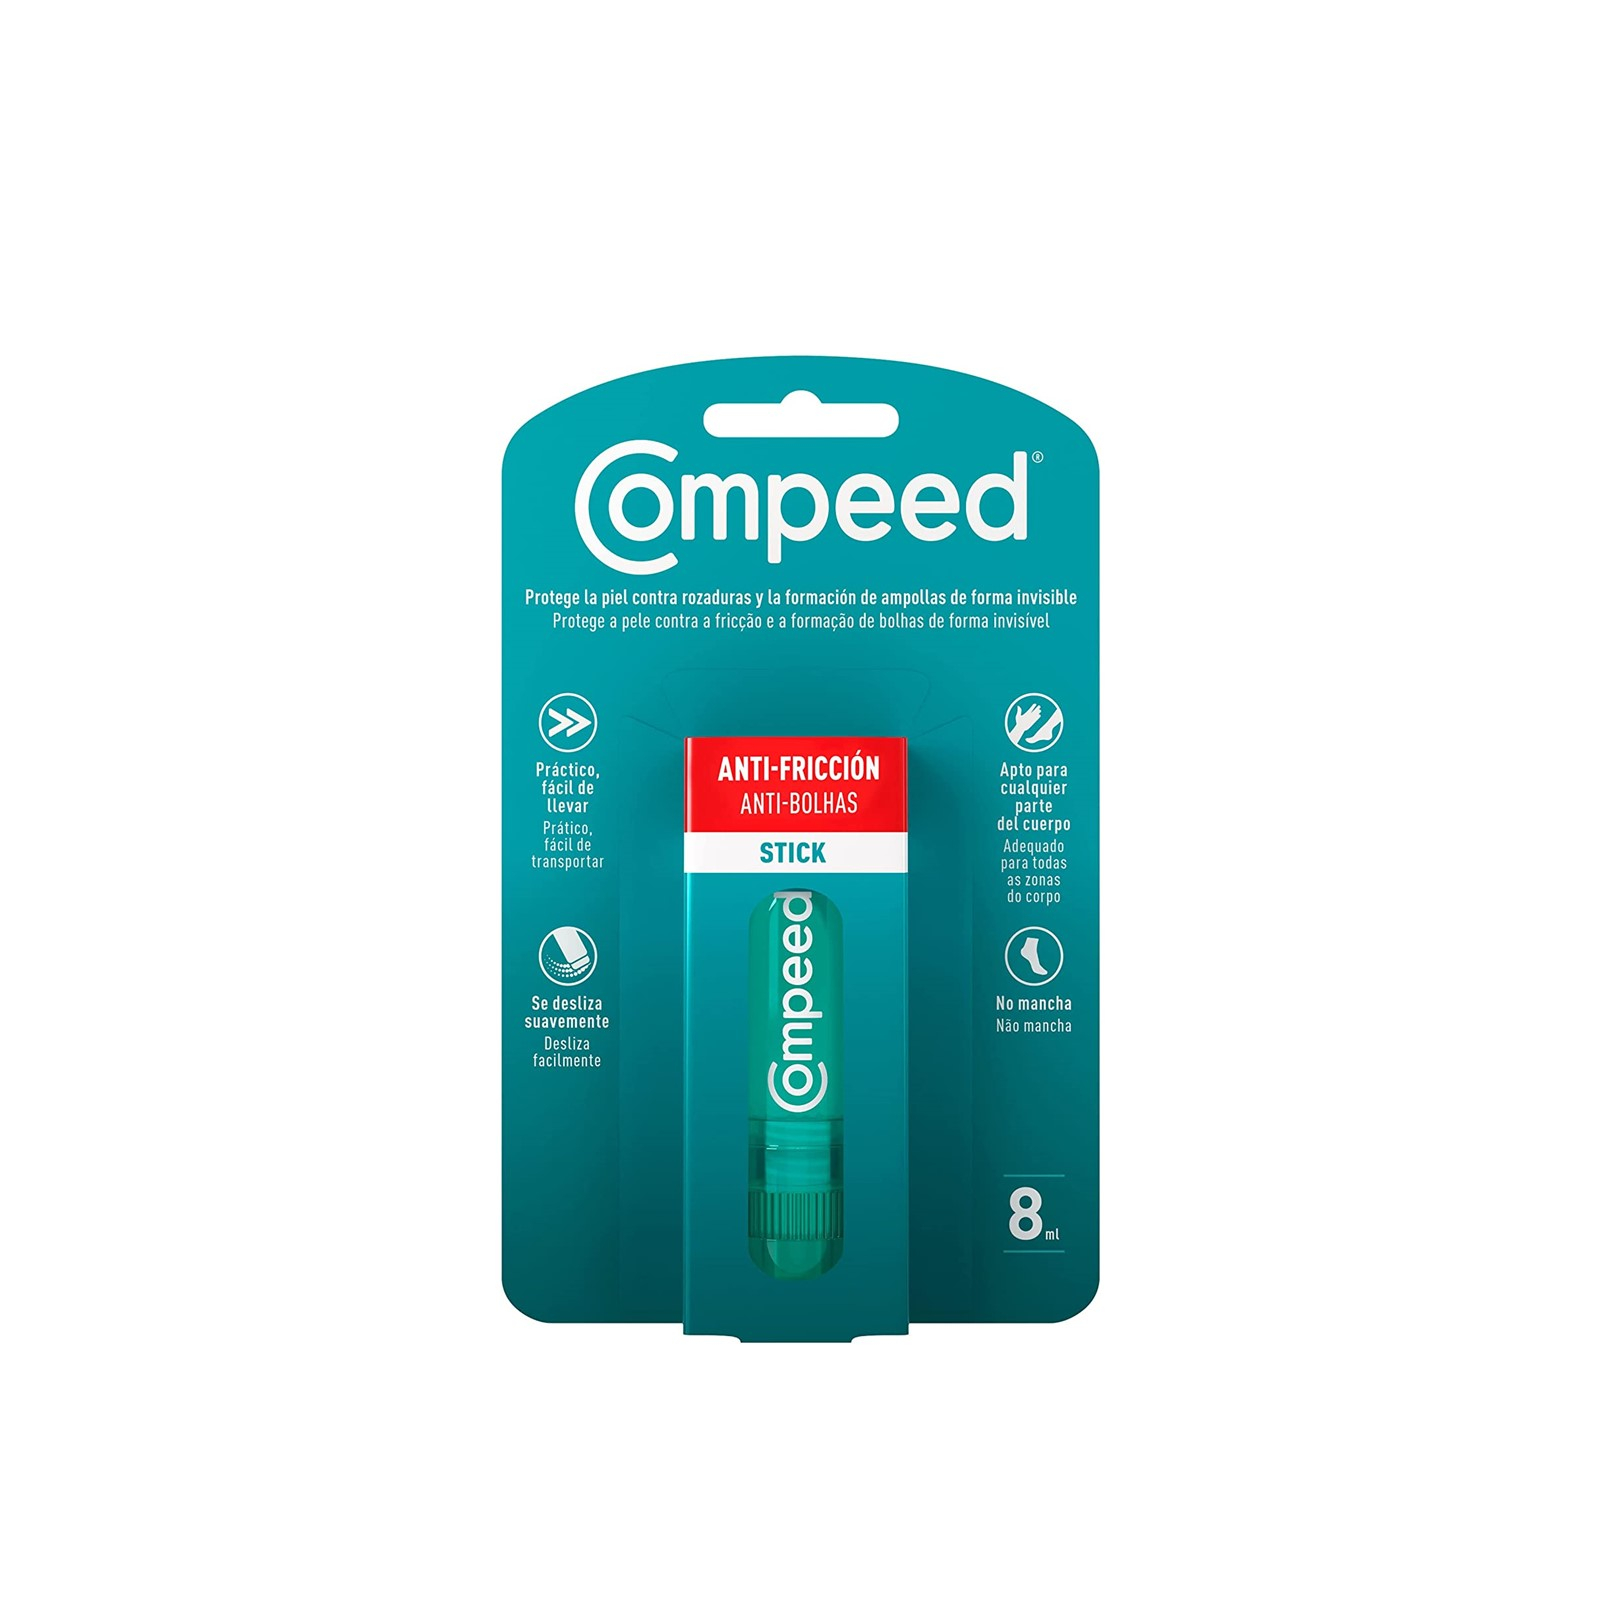 The Compeed Anti Blister Stick instantly reduces rubbing on the